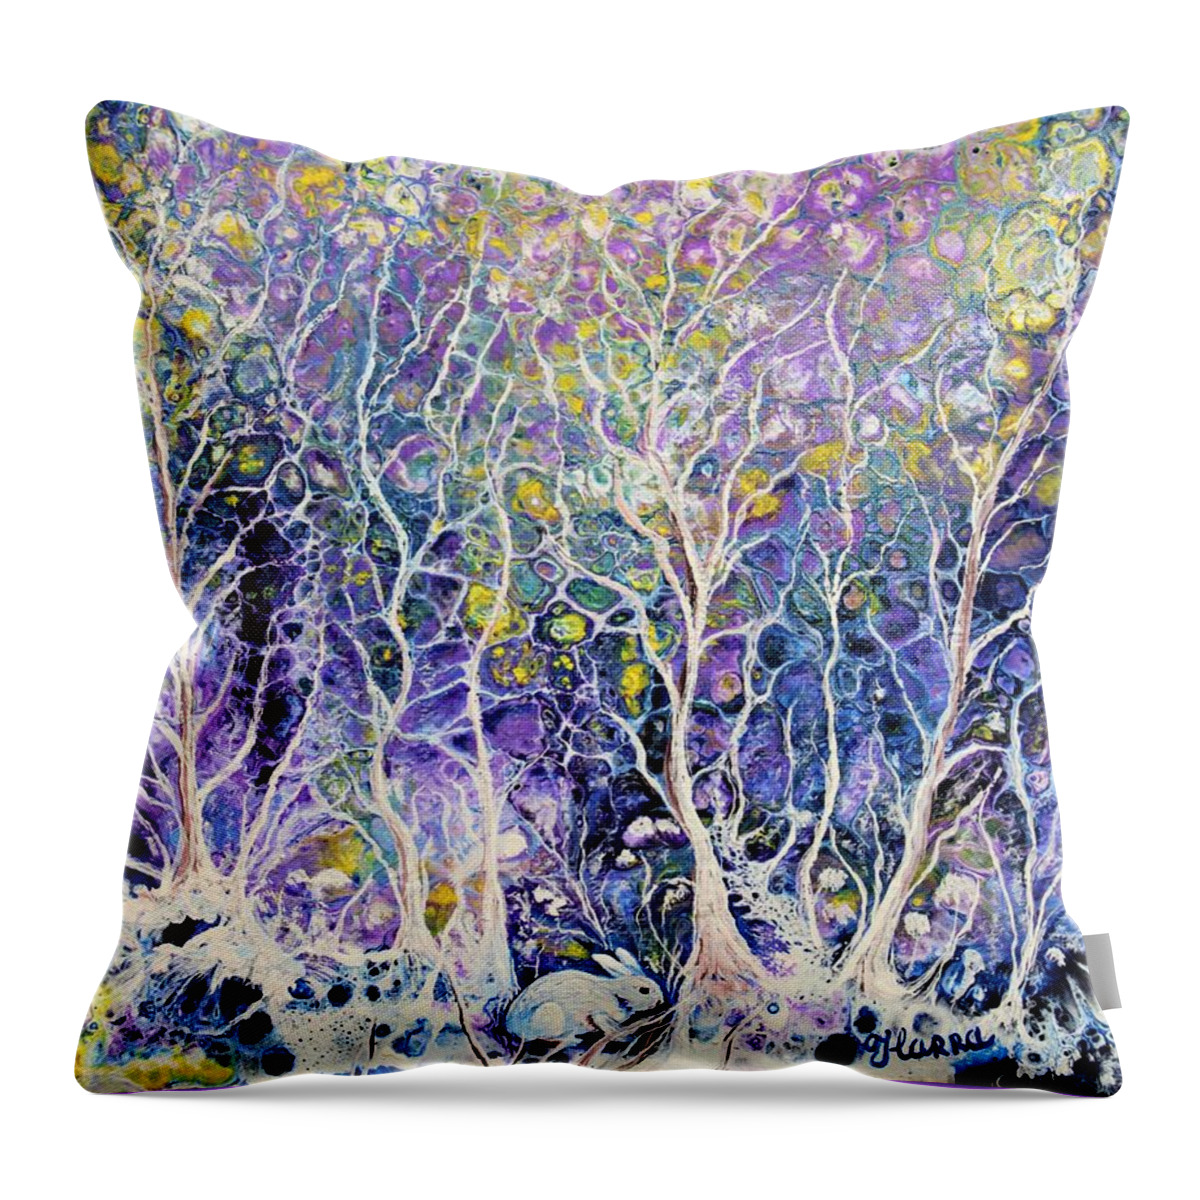 Wall Art Abstract Forest Gift For Her Home Décor Bunny White Forest White Bunny White Snow Acrylic Paint Painting On Canvas Wall Décor Gift Idea Pouring Art Pouring Technique Throw Pillow featuring the painting Fairy Forest by Tanya Harr